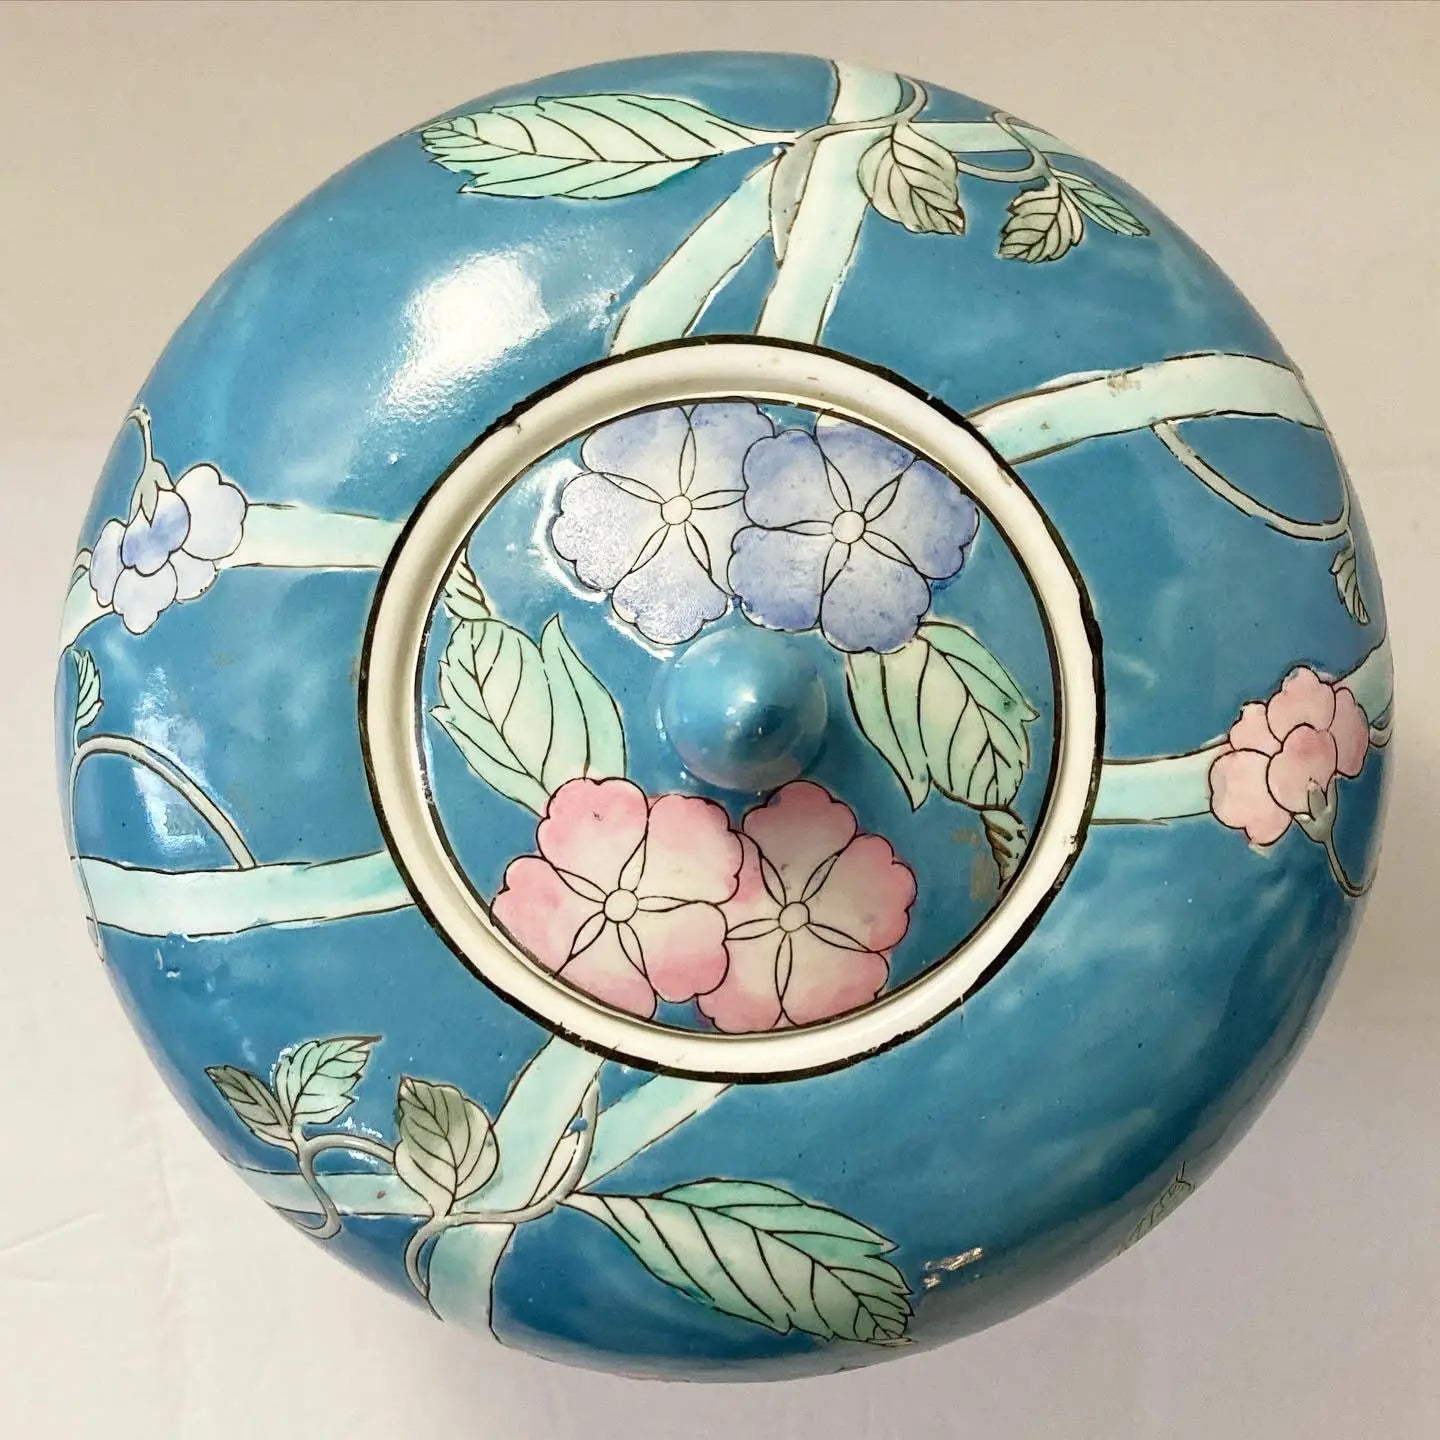 Mid 20th Century Chinese Wbi Enameled, Hand-Painted Ginger Jar